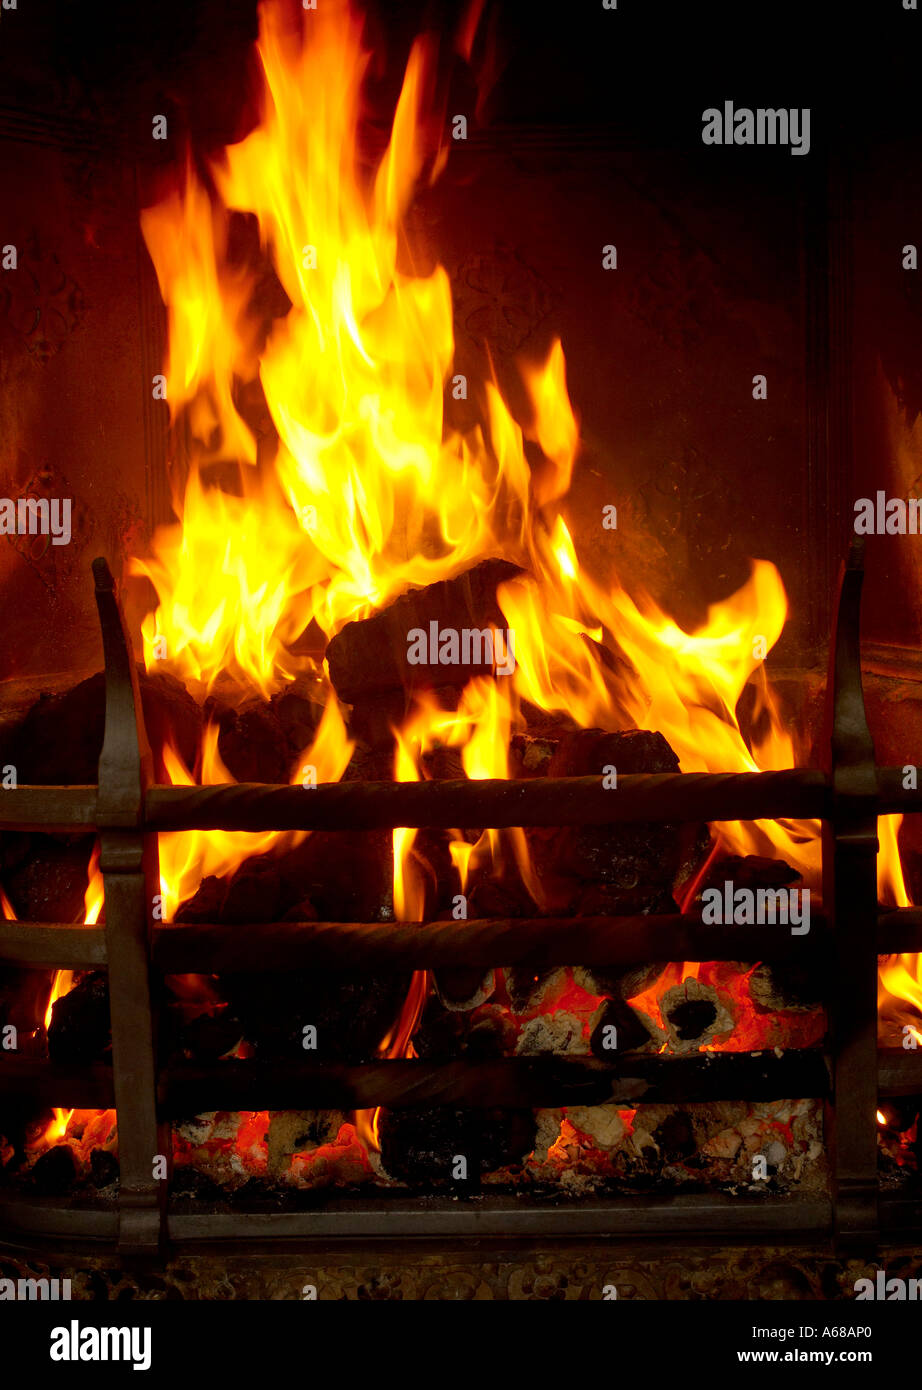 Fire in traditional grate Stock Photo